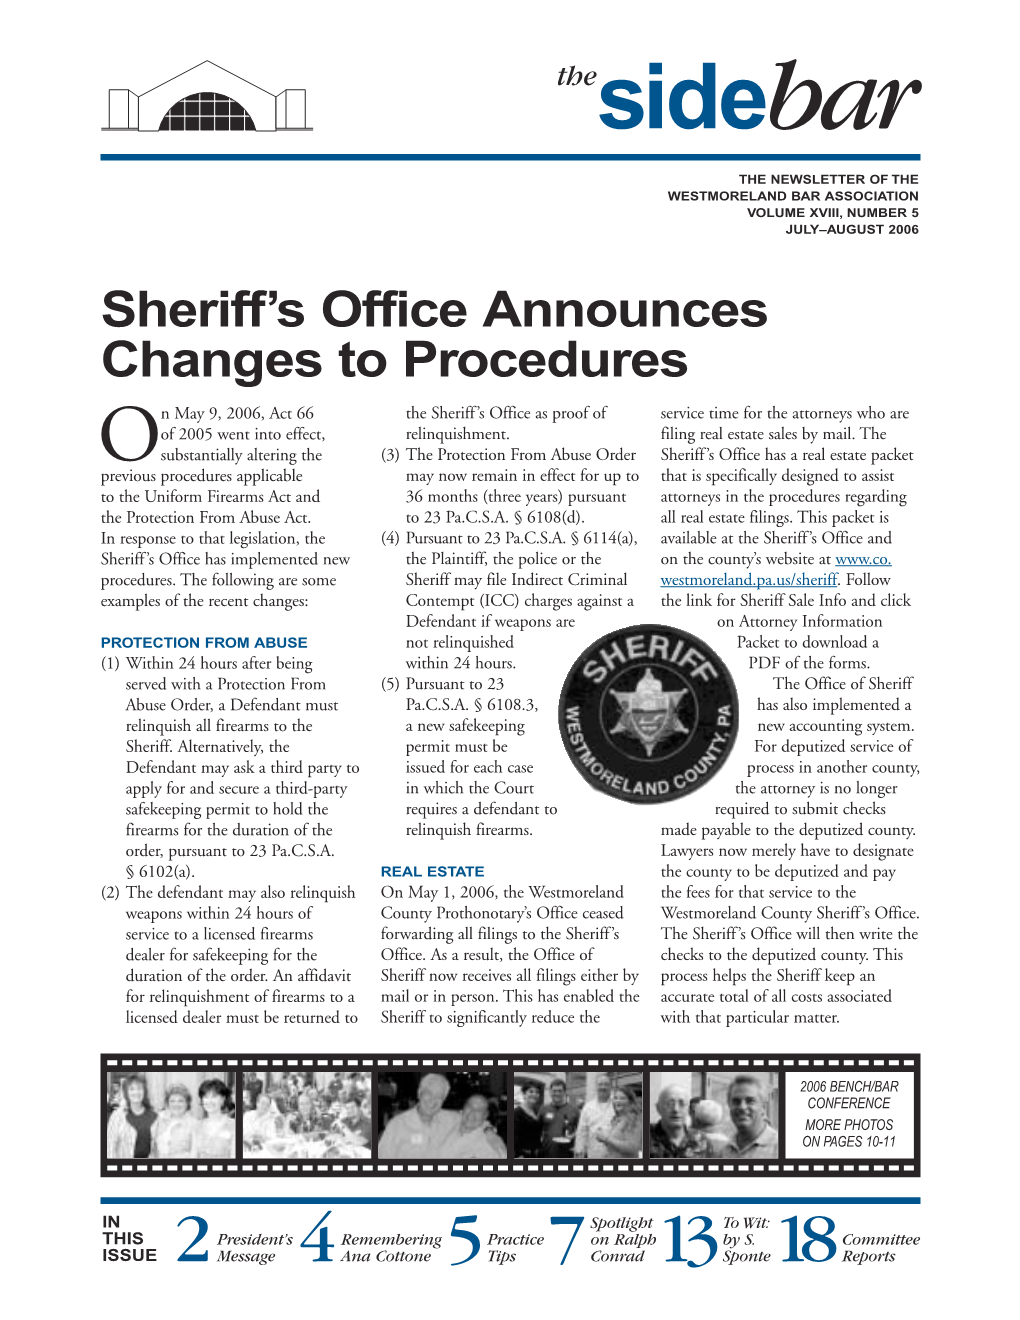 Sheriff's Office Announces Changes to Procedures